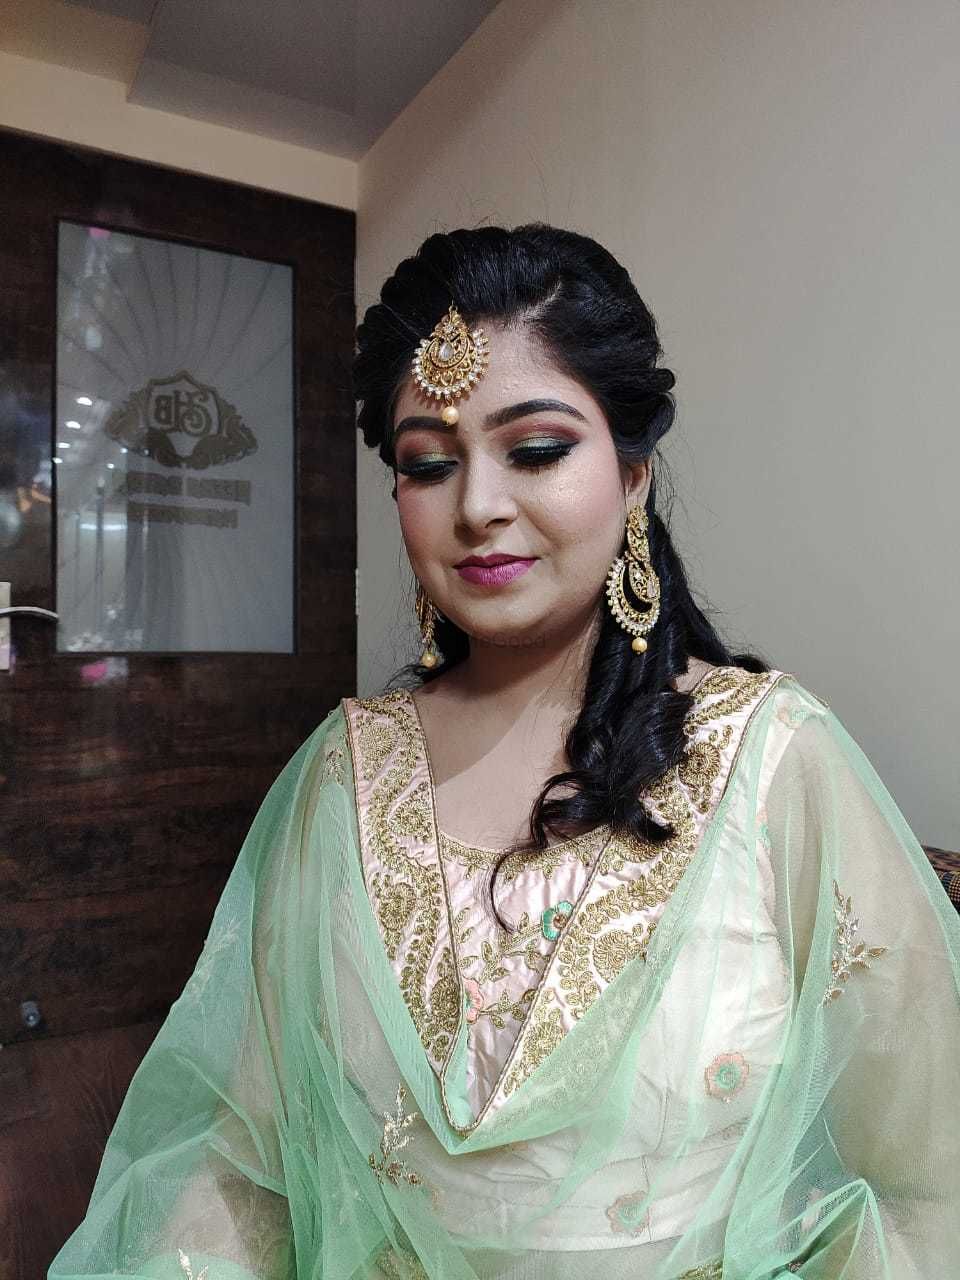 Photo From HD Engagement Makeups - By Heena Batra Makeovers